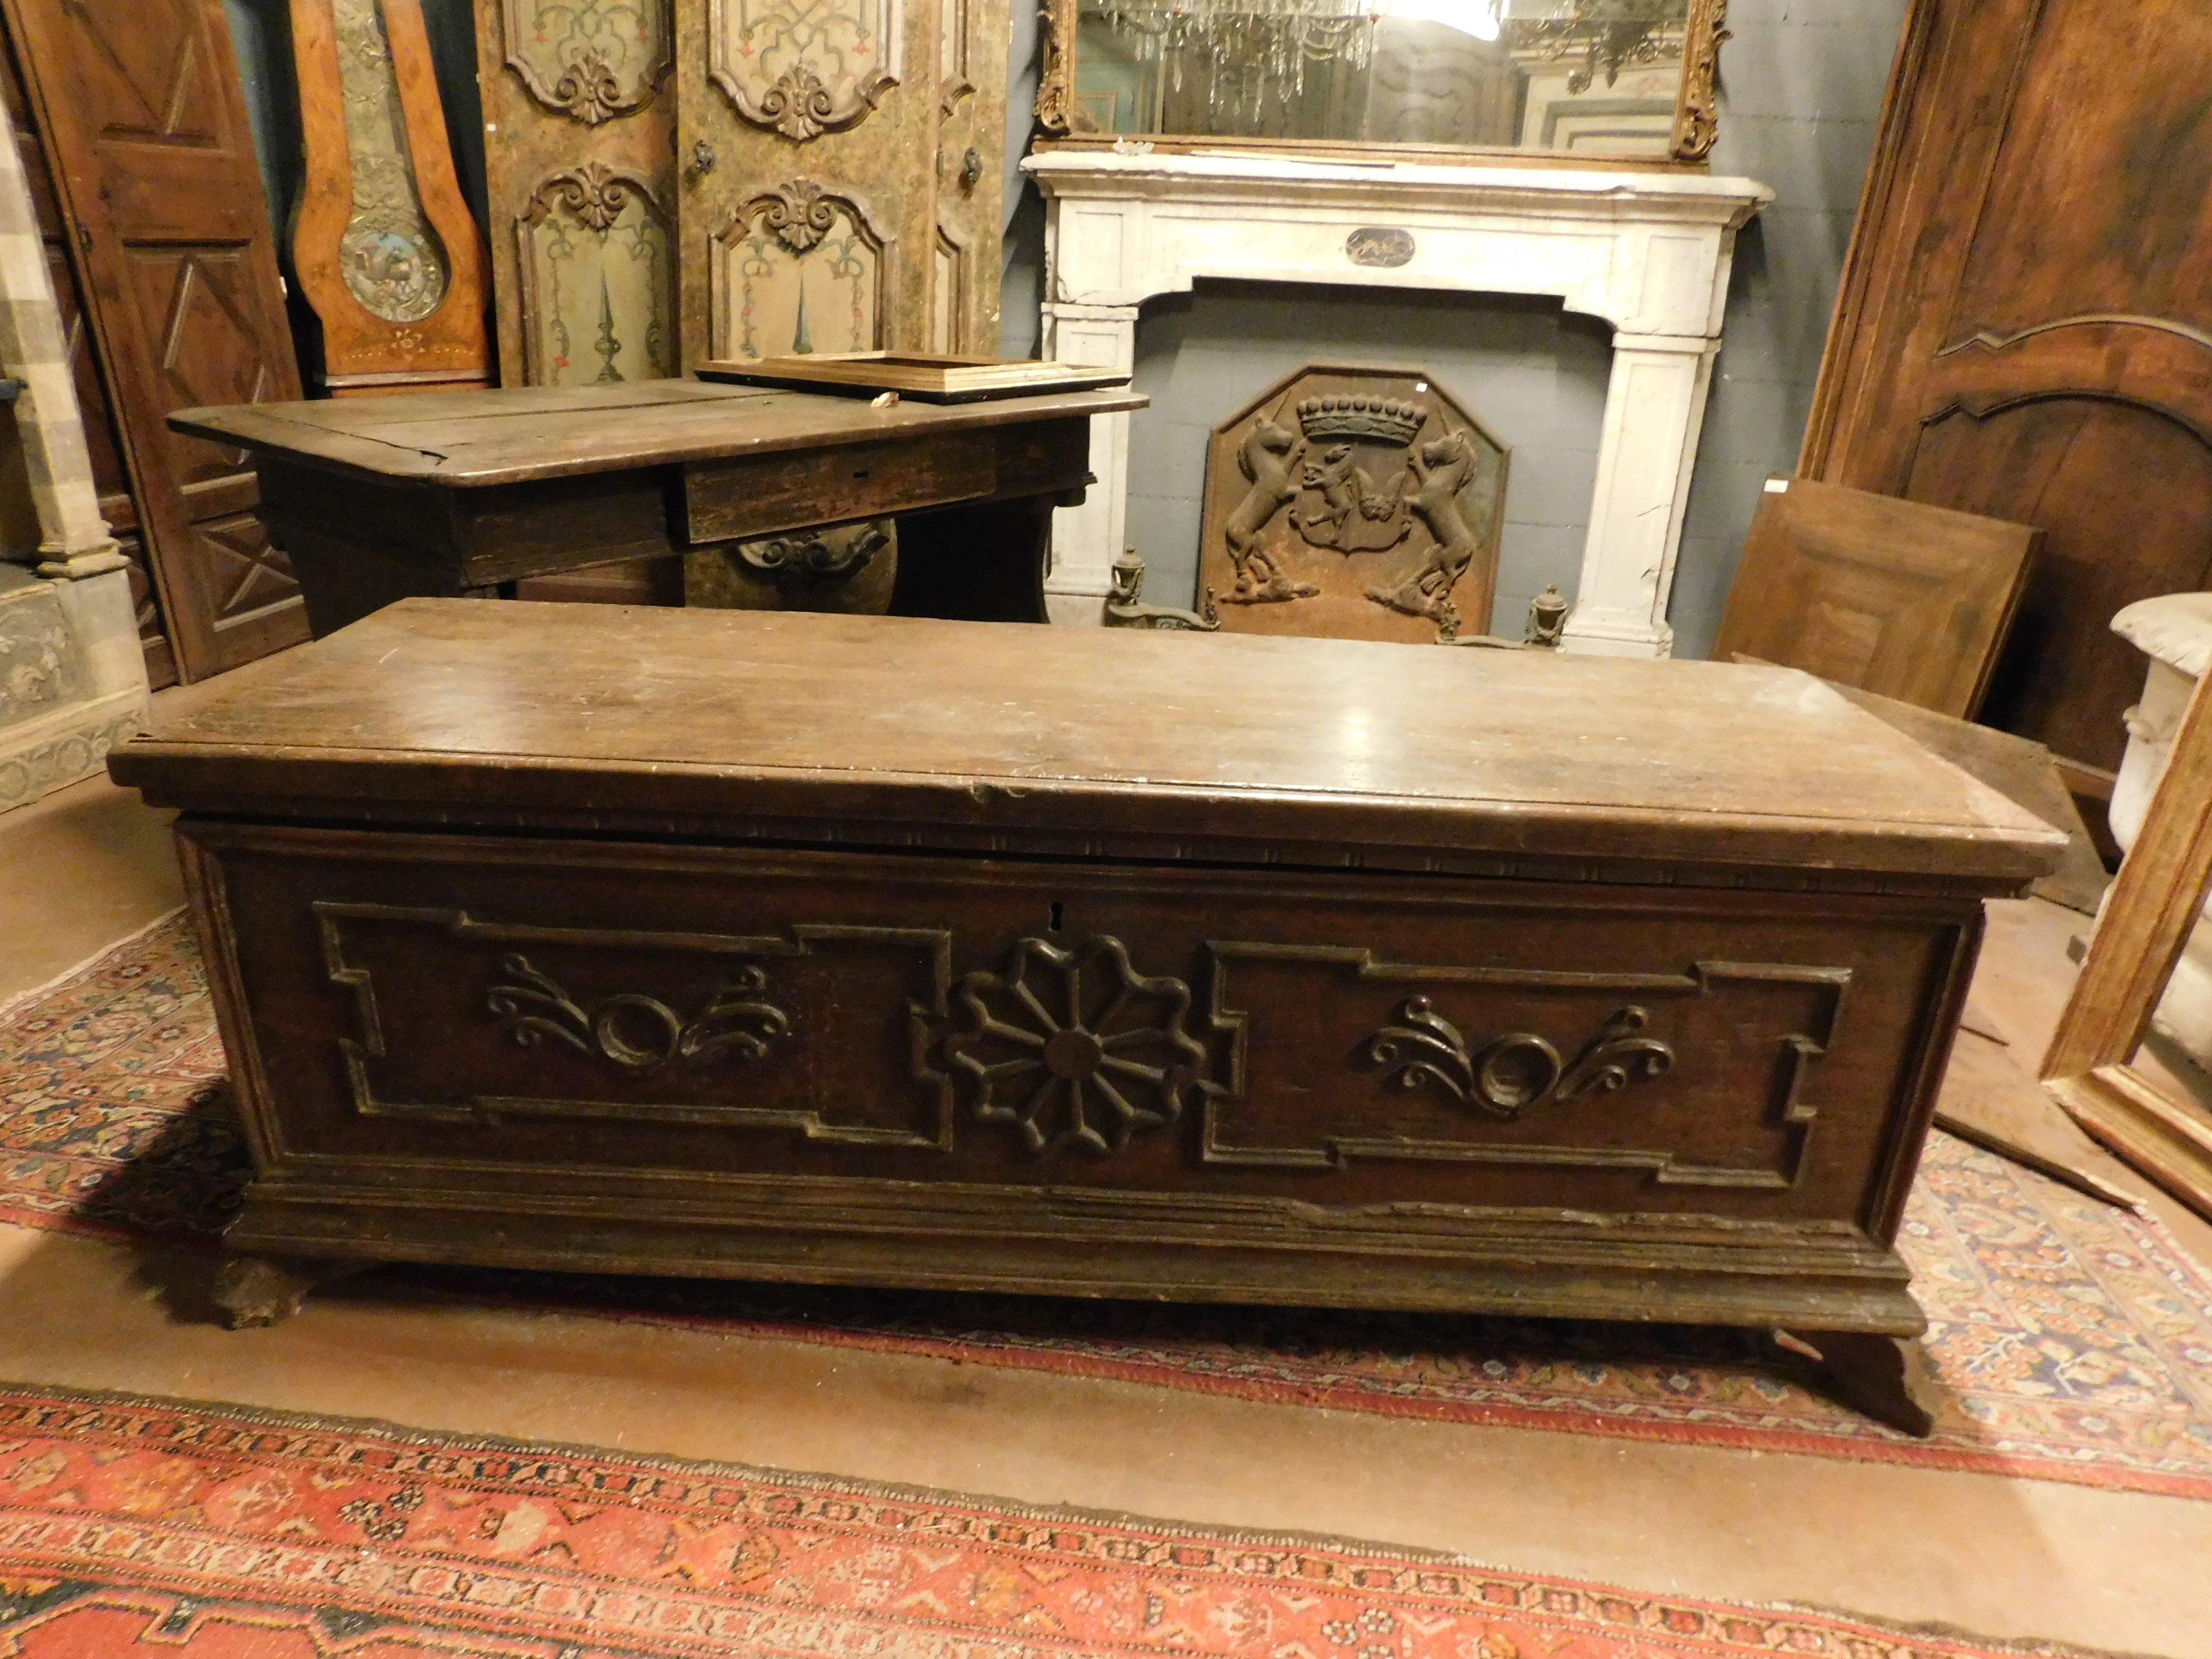 Ancient chest carved in walnut, entirely in solid wood with opening top, period legs, hand-built in Italy in the early 18th century.
Ideal for storing blankets or objects in an entrance, or as a bed base or in an elegant living room, maximum size w